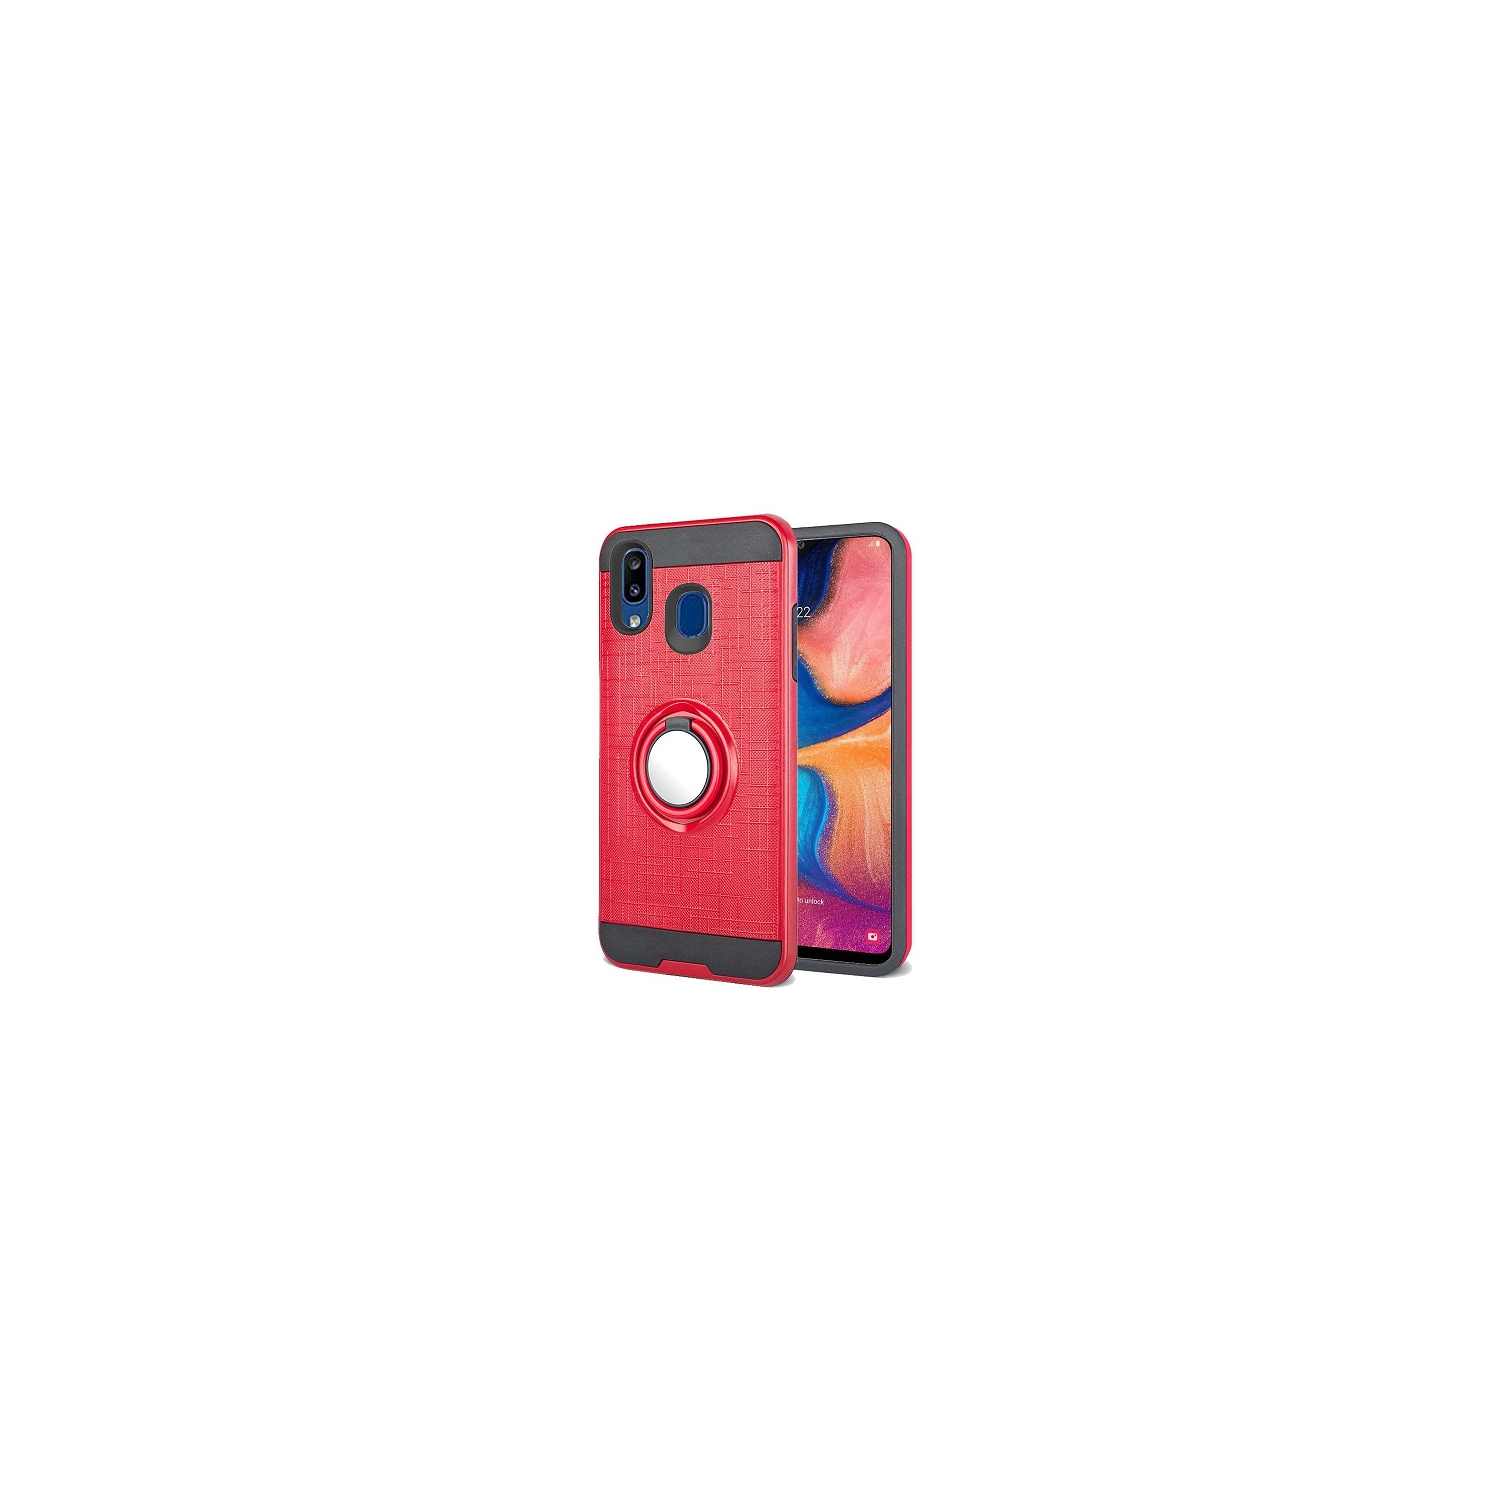 Galaxy A20s Hard Cover Case w/360 degrees rotating ring stand, Red